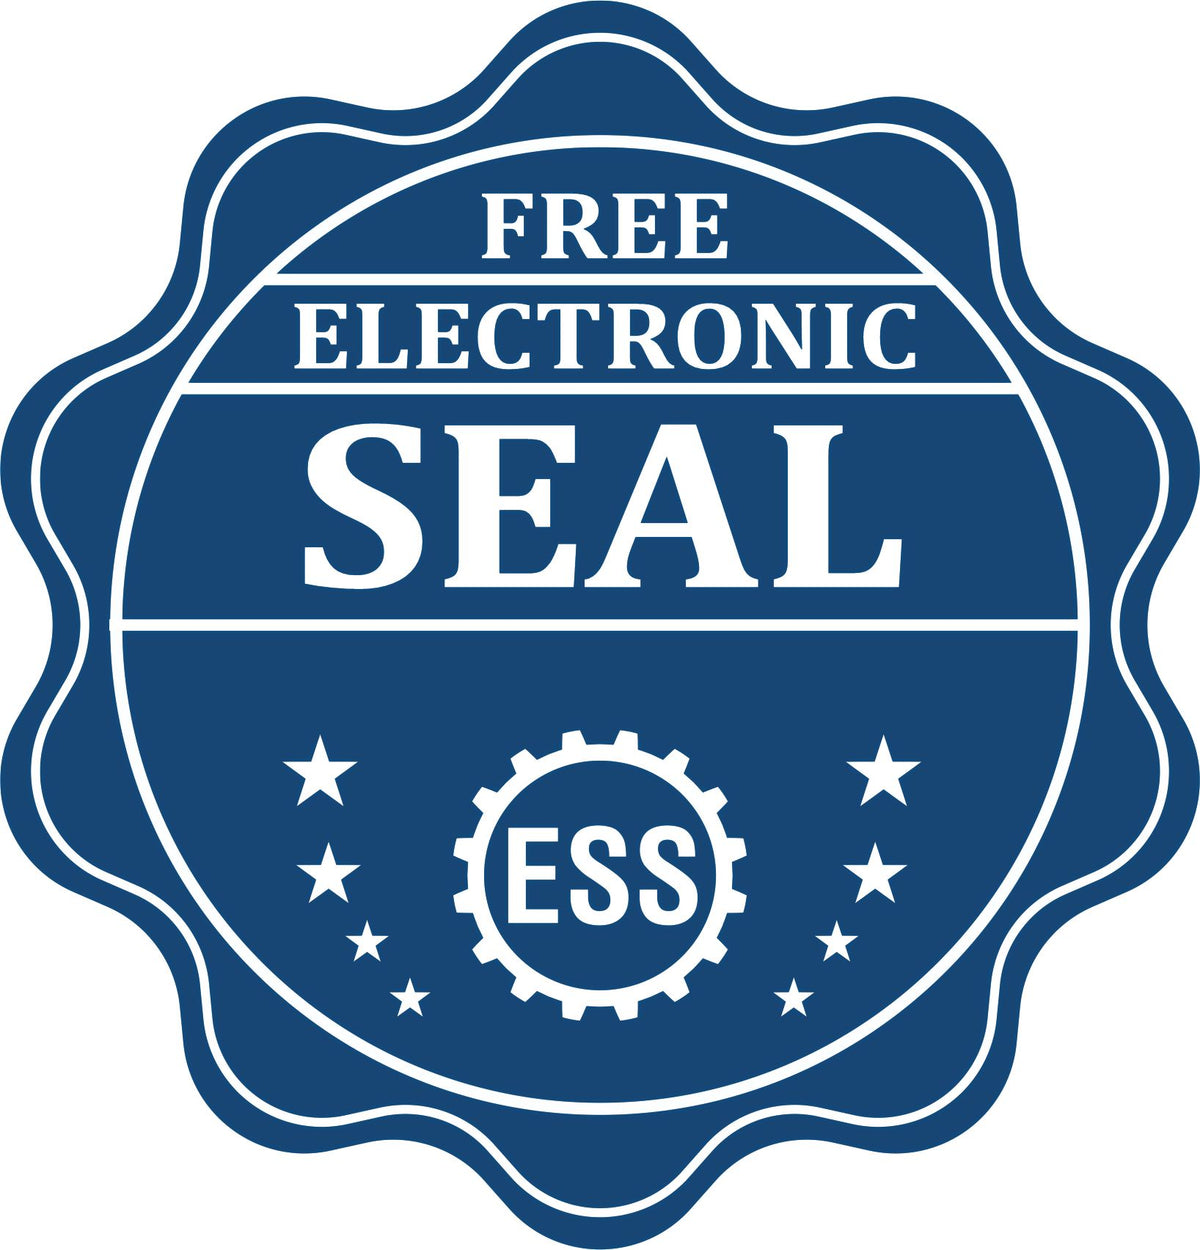 A badge showing a free electronic seal for the Slim Pre-Inked Wisconsin Professional Engineer Seal Stamp with stars and the ESS gear on the emblem.